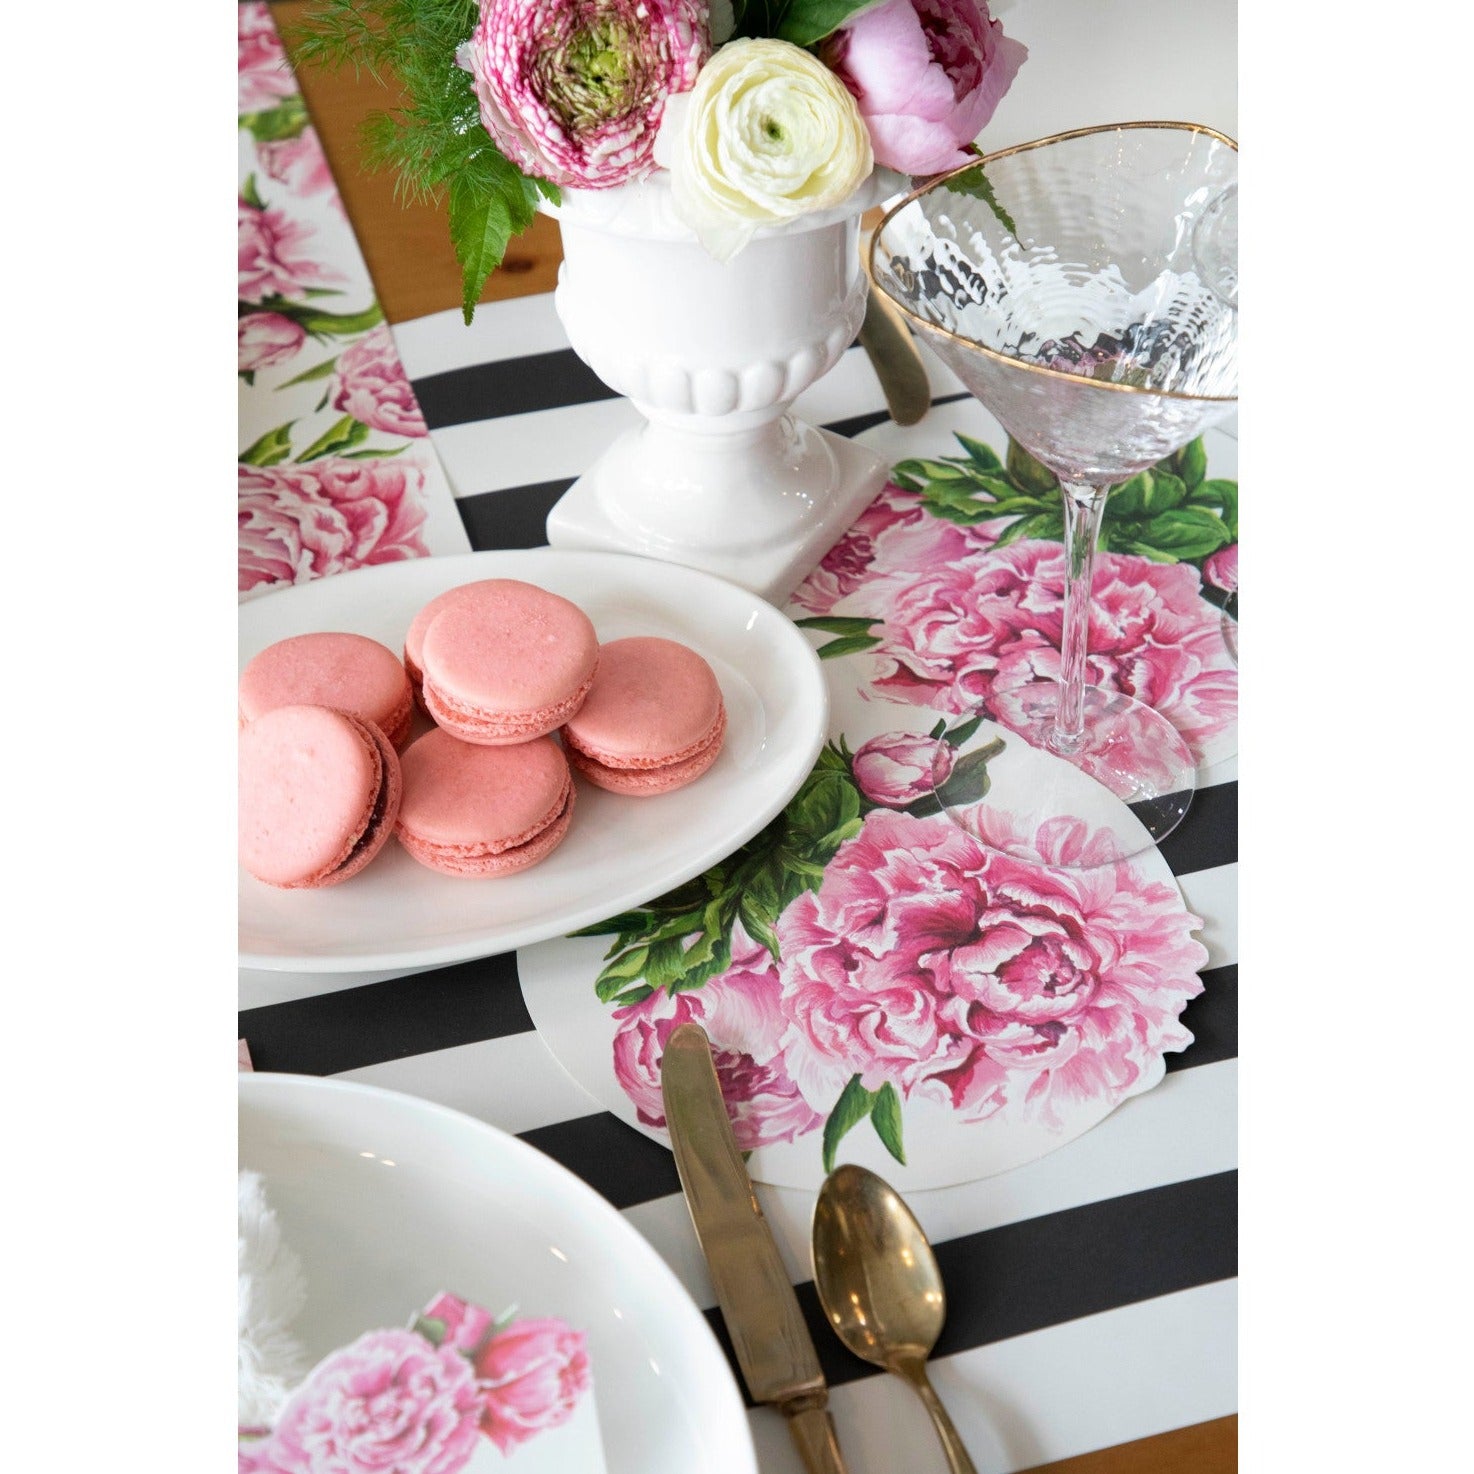 An elegant, floral treat spread featuring Peony Serving Papers under various cookies and treats, and a flower vase.